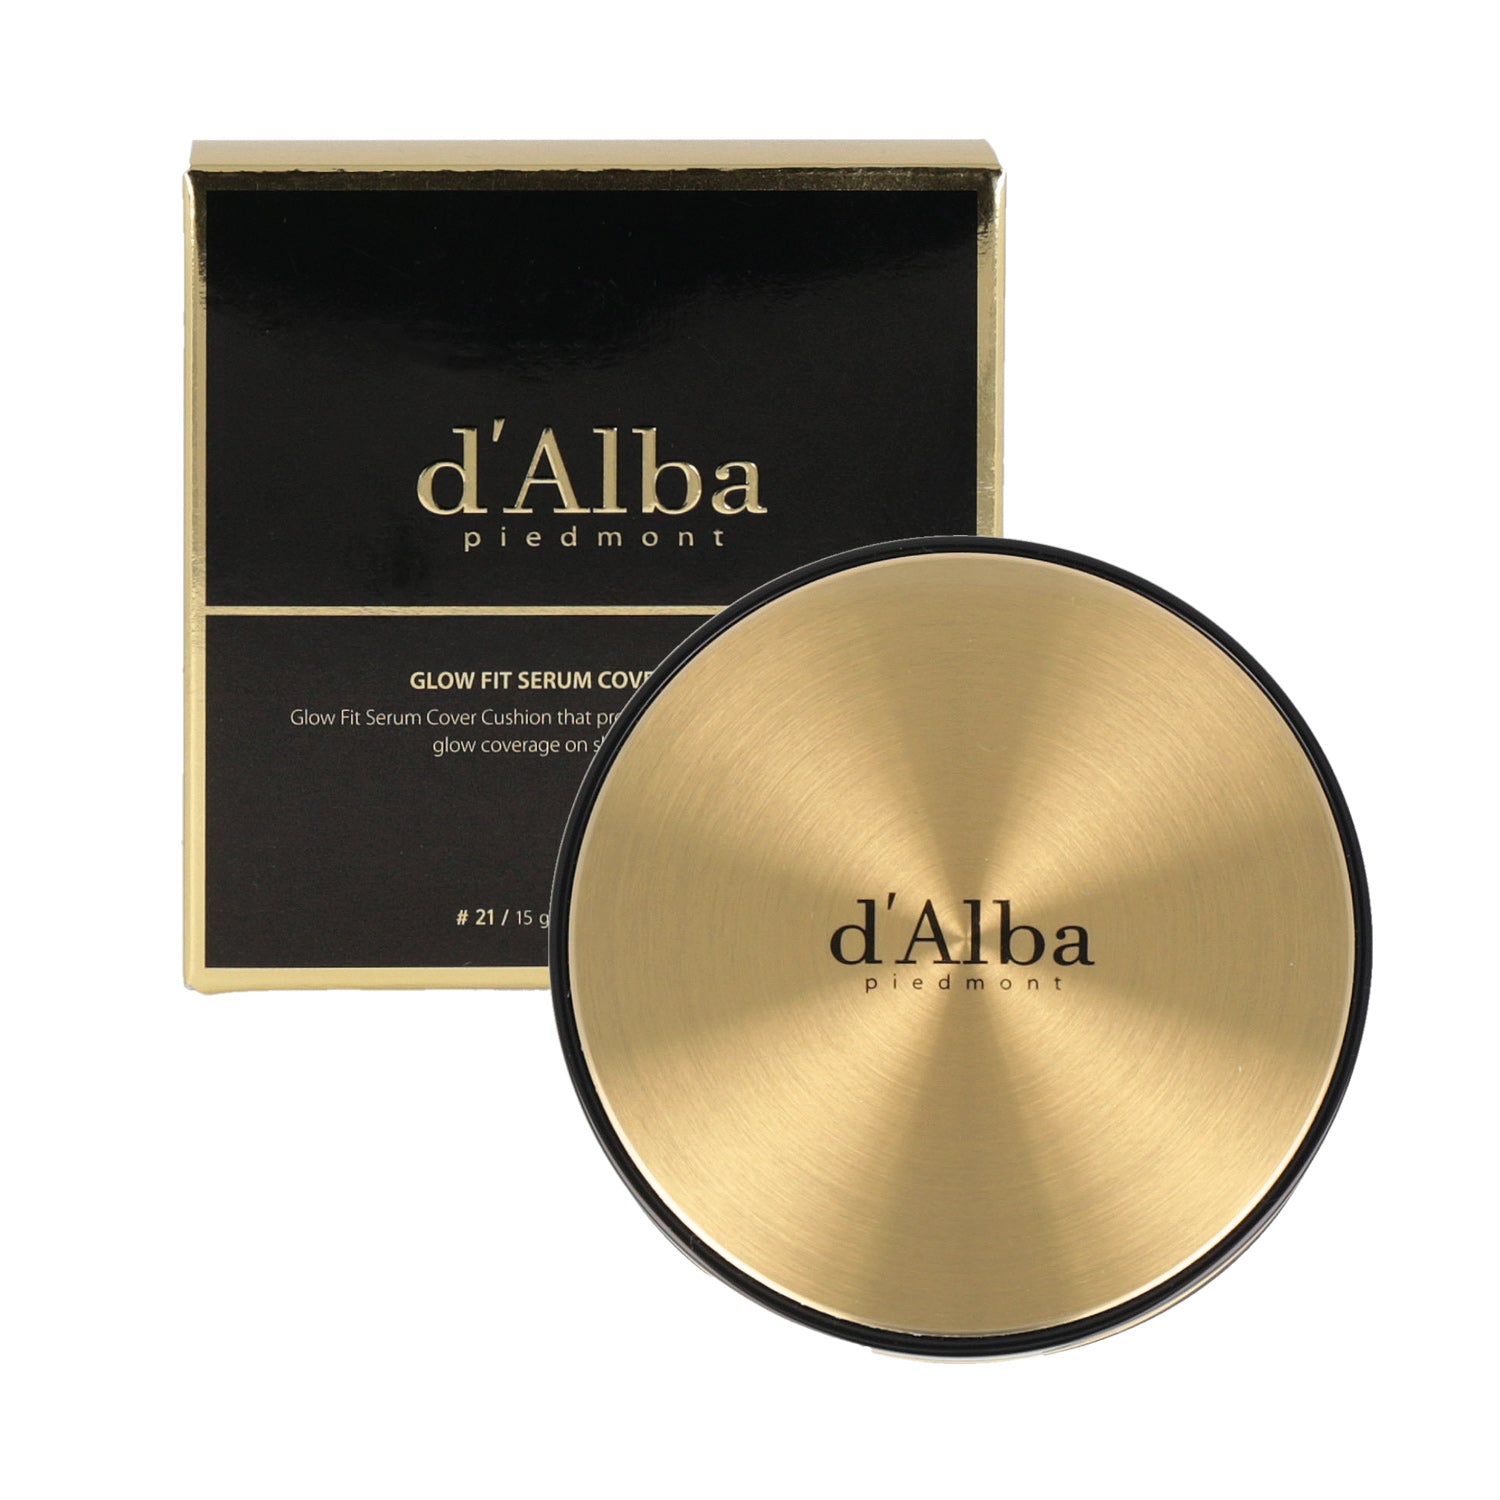 d'Alba Glow Fit Serum Cover Cushion 15g SPF50+ PA++++ -  is a multi-functional beauty product that combines skincare and makeup in one convenient compact